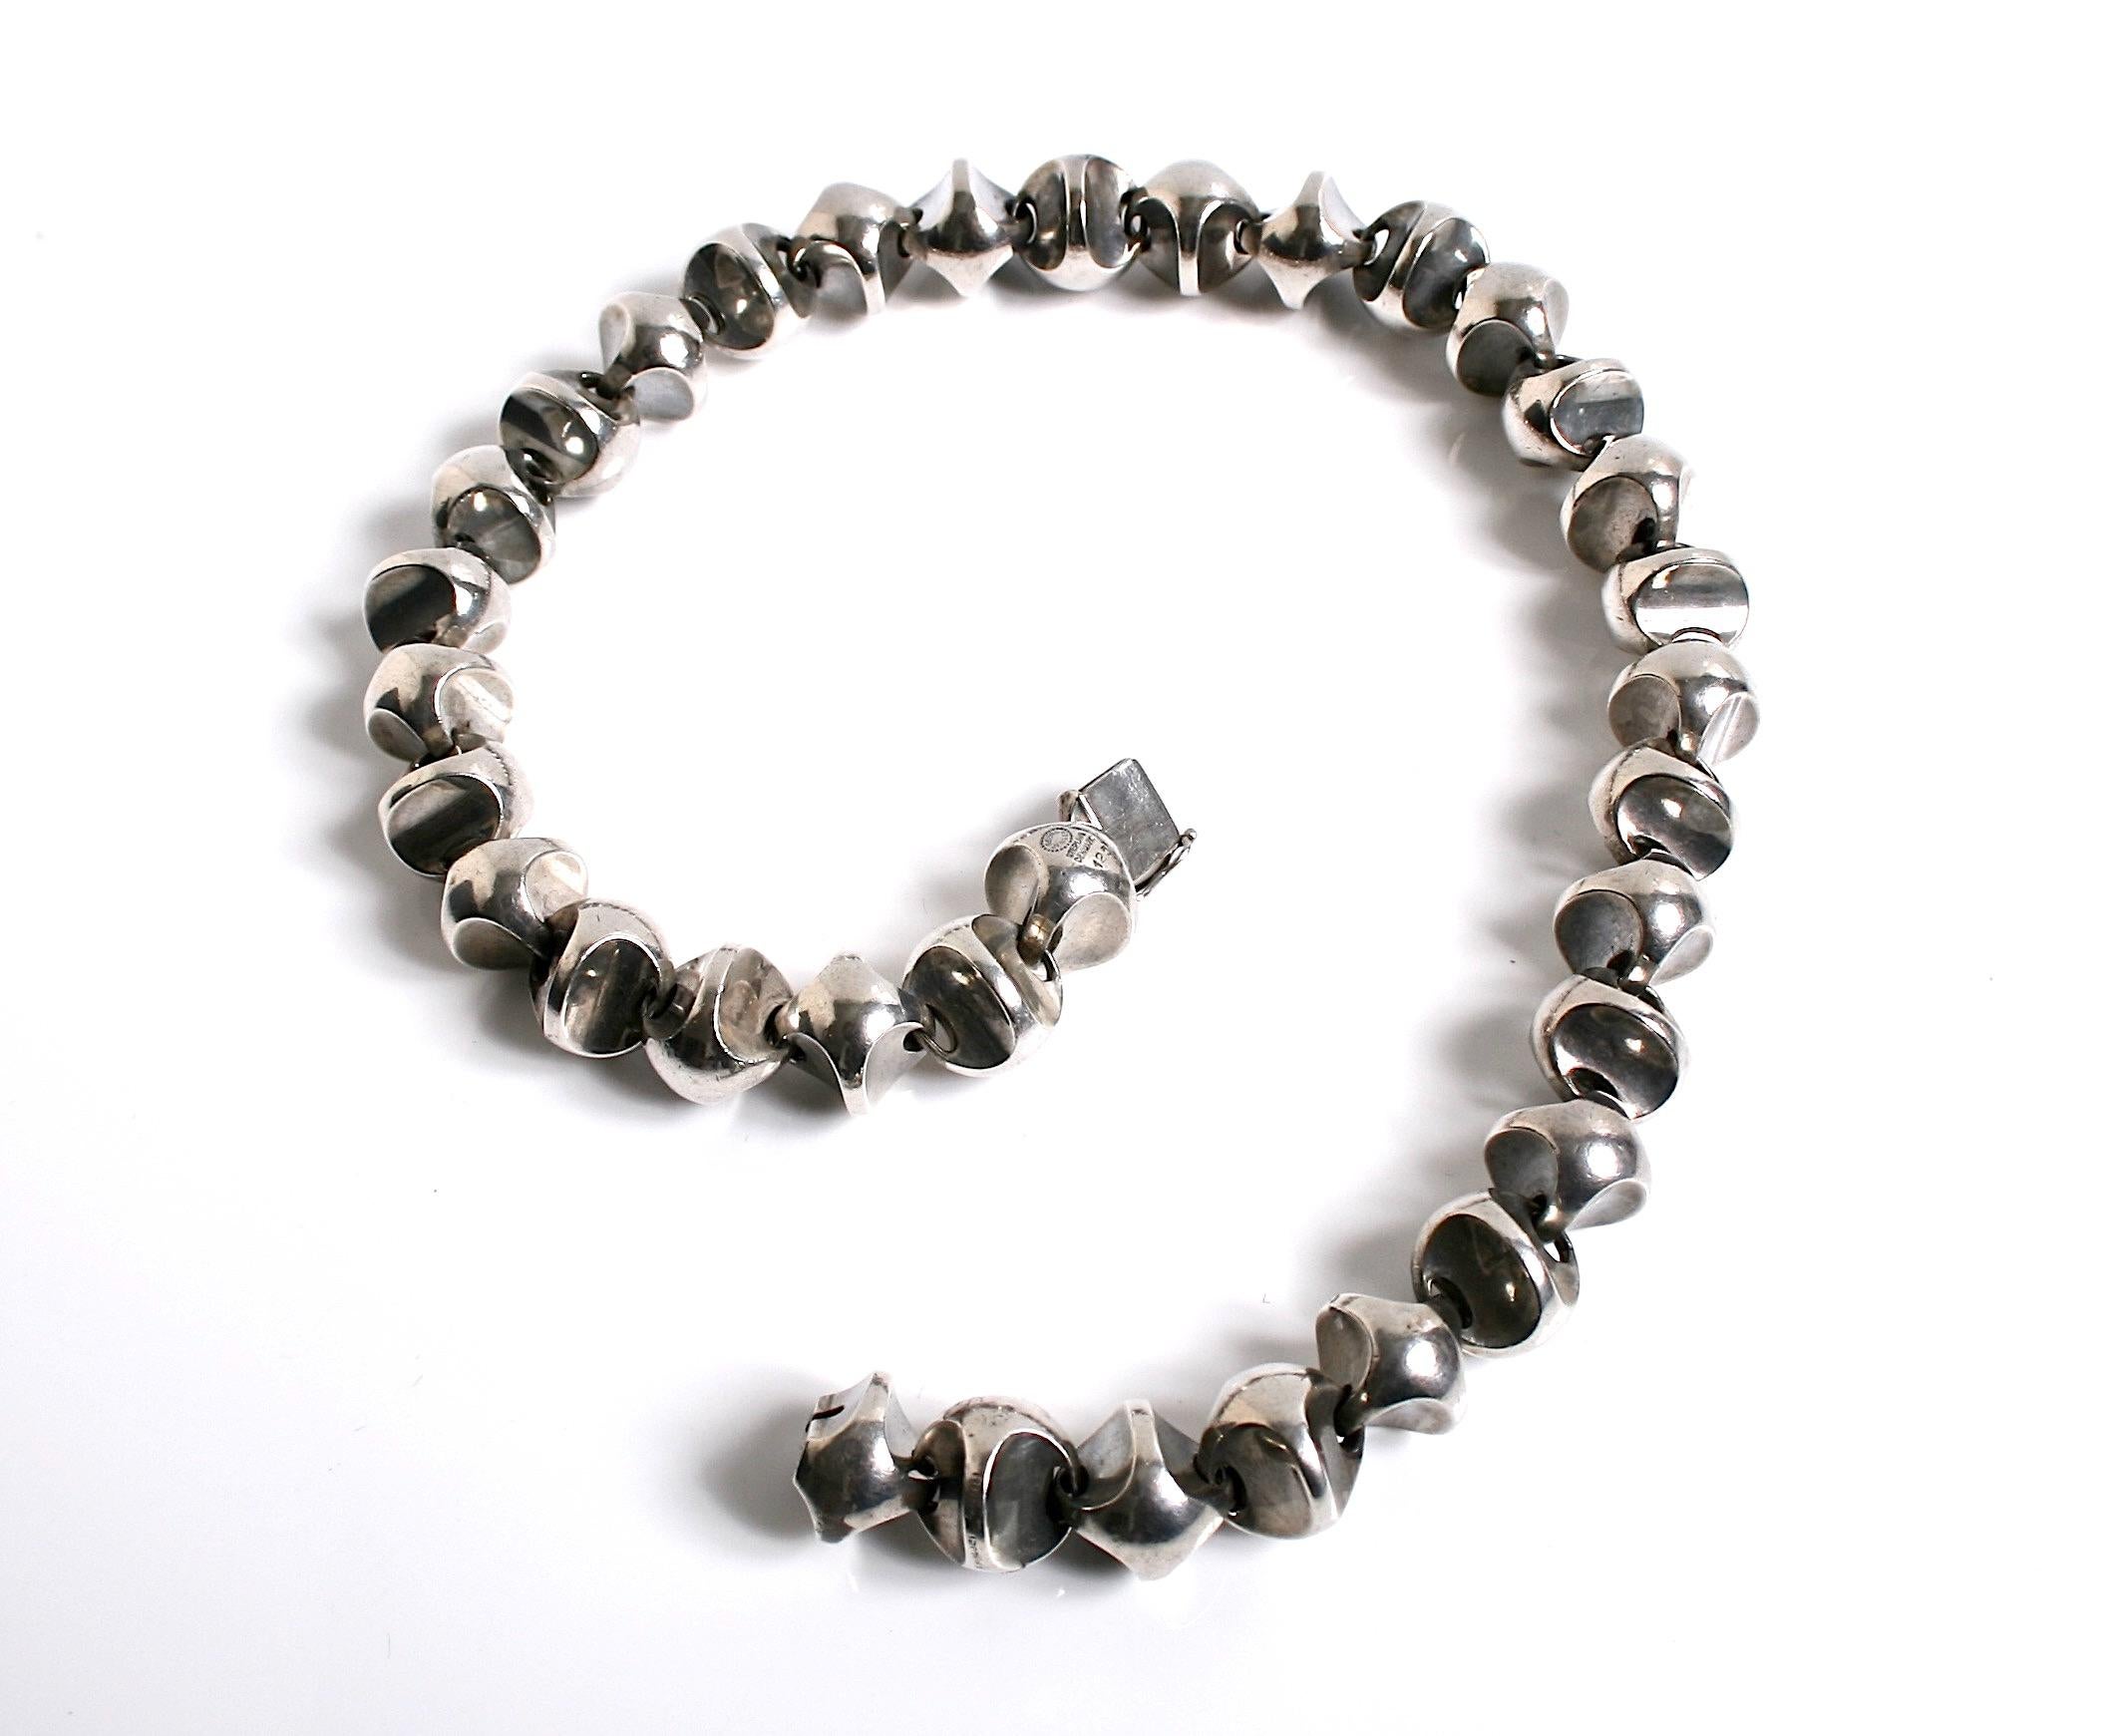 Extremely Rare sterling silver cast necklace designed by Flemming Eskildsen for Georg Jensen Denmark c.1961 design number 125. Very early sought after necklace matching bracelet available. Comes in a Georg Jensen box Markings: post 1945 stamps